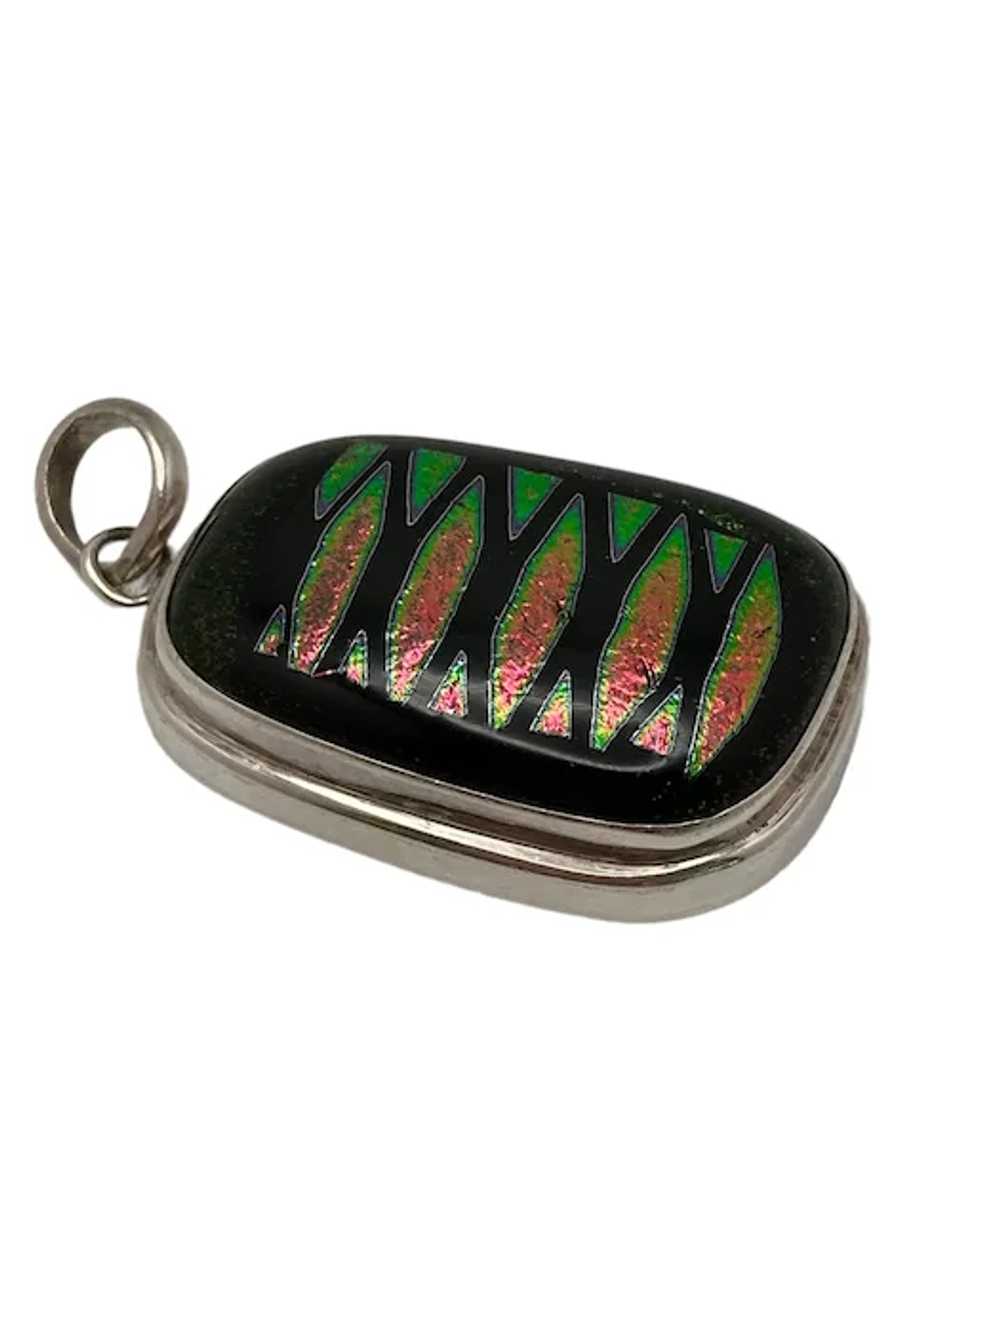 Sterling Silver and Dichroic Art Glass Pendant - image 5